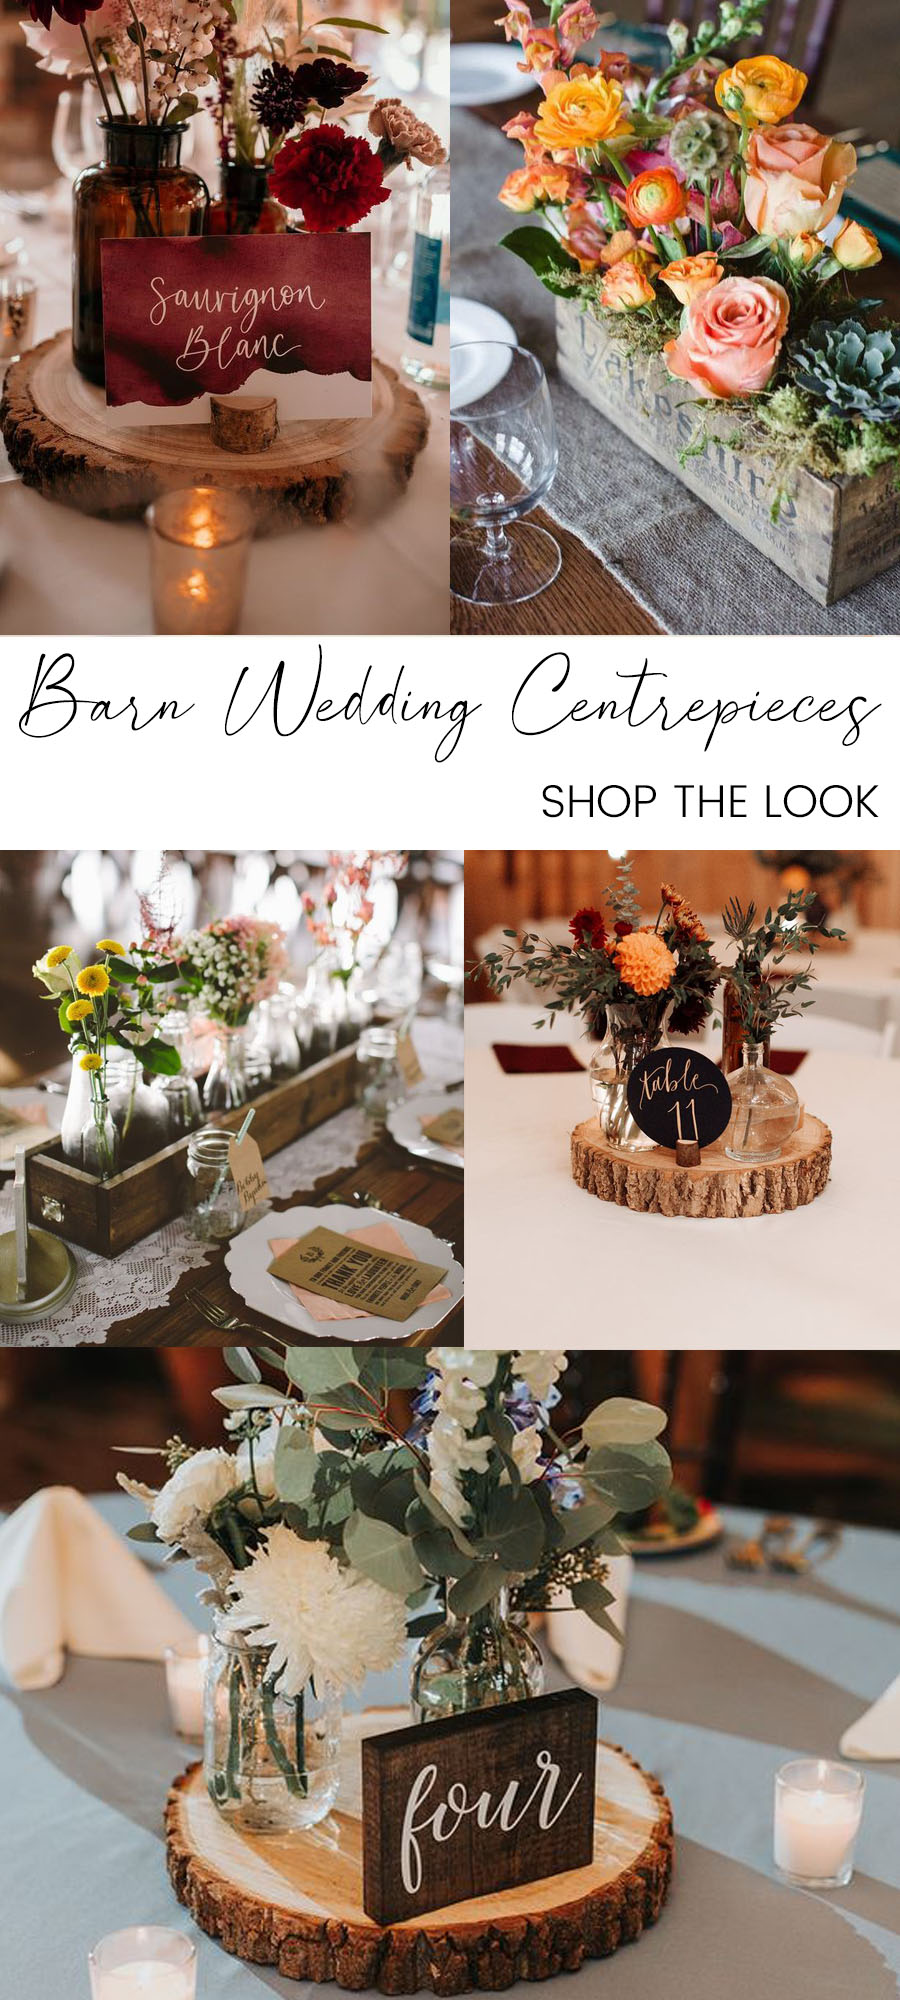 Amazing Centrepieces for Barn Weddings